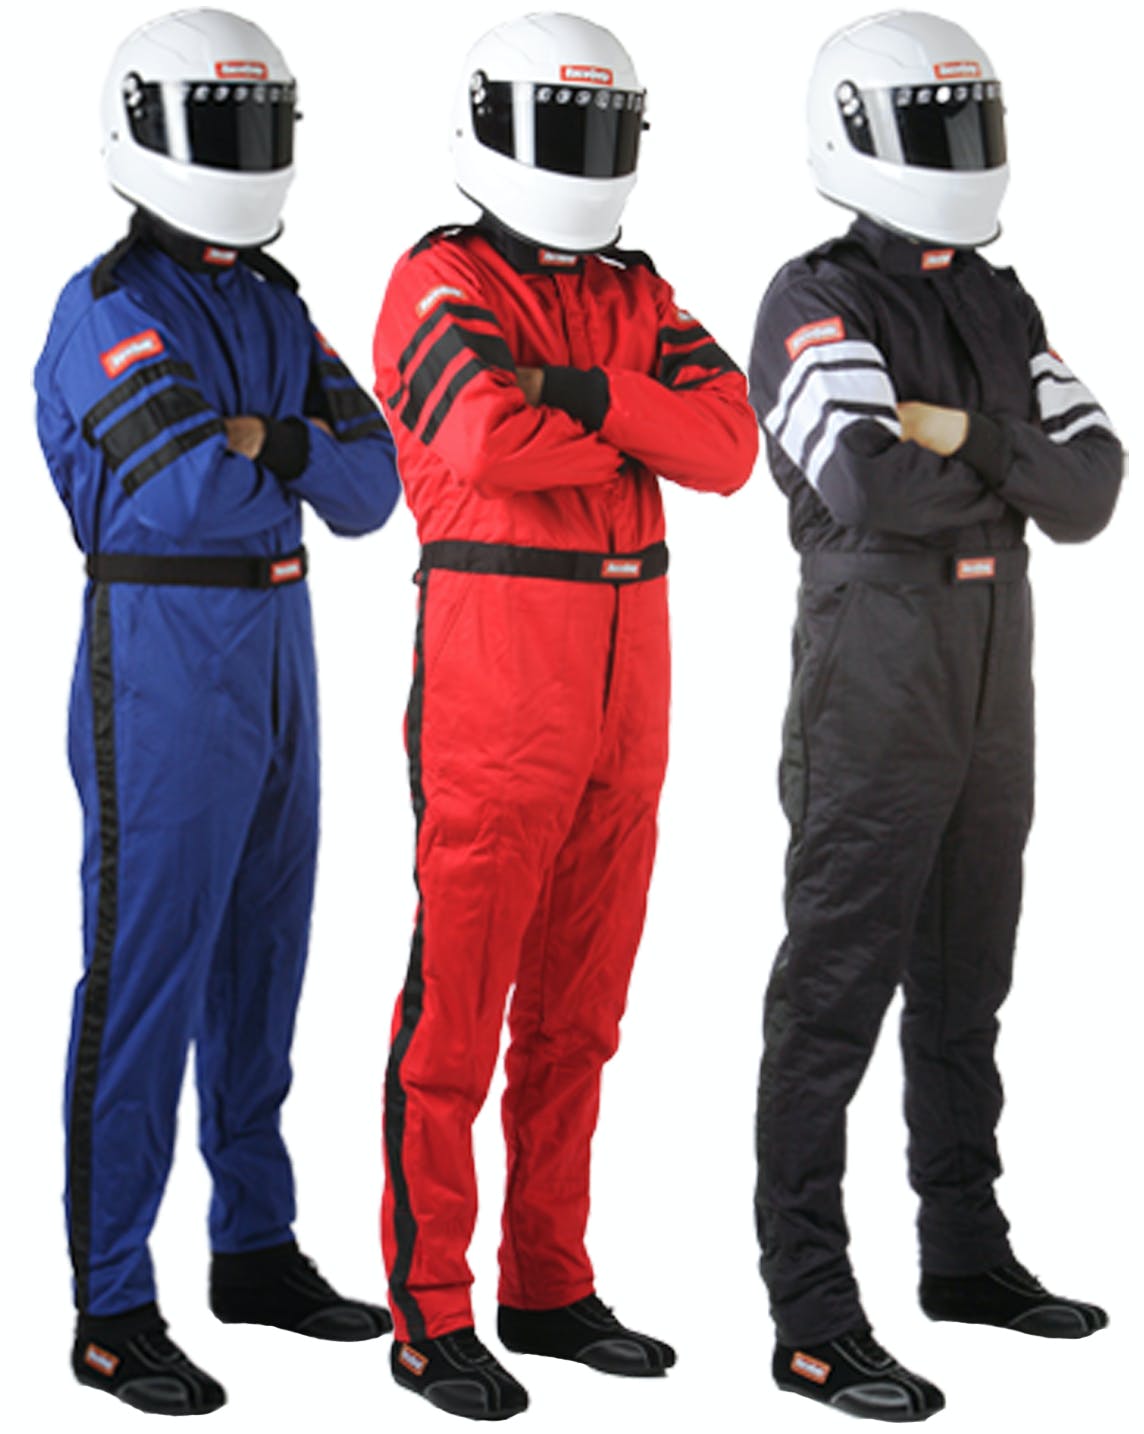 RaceQuip 120012 SFI-5 Pyrovatex One-Piece Multi-Layer Racing Fire Suit (Red, Small)